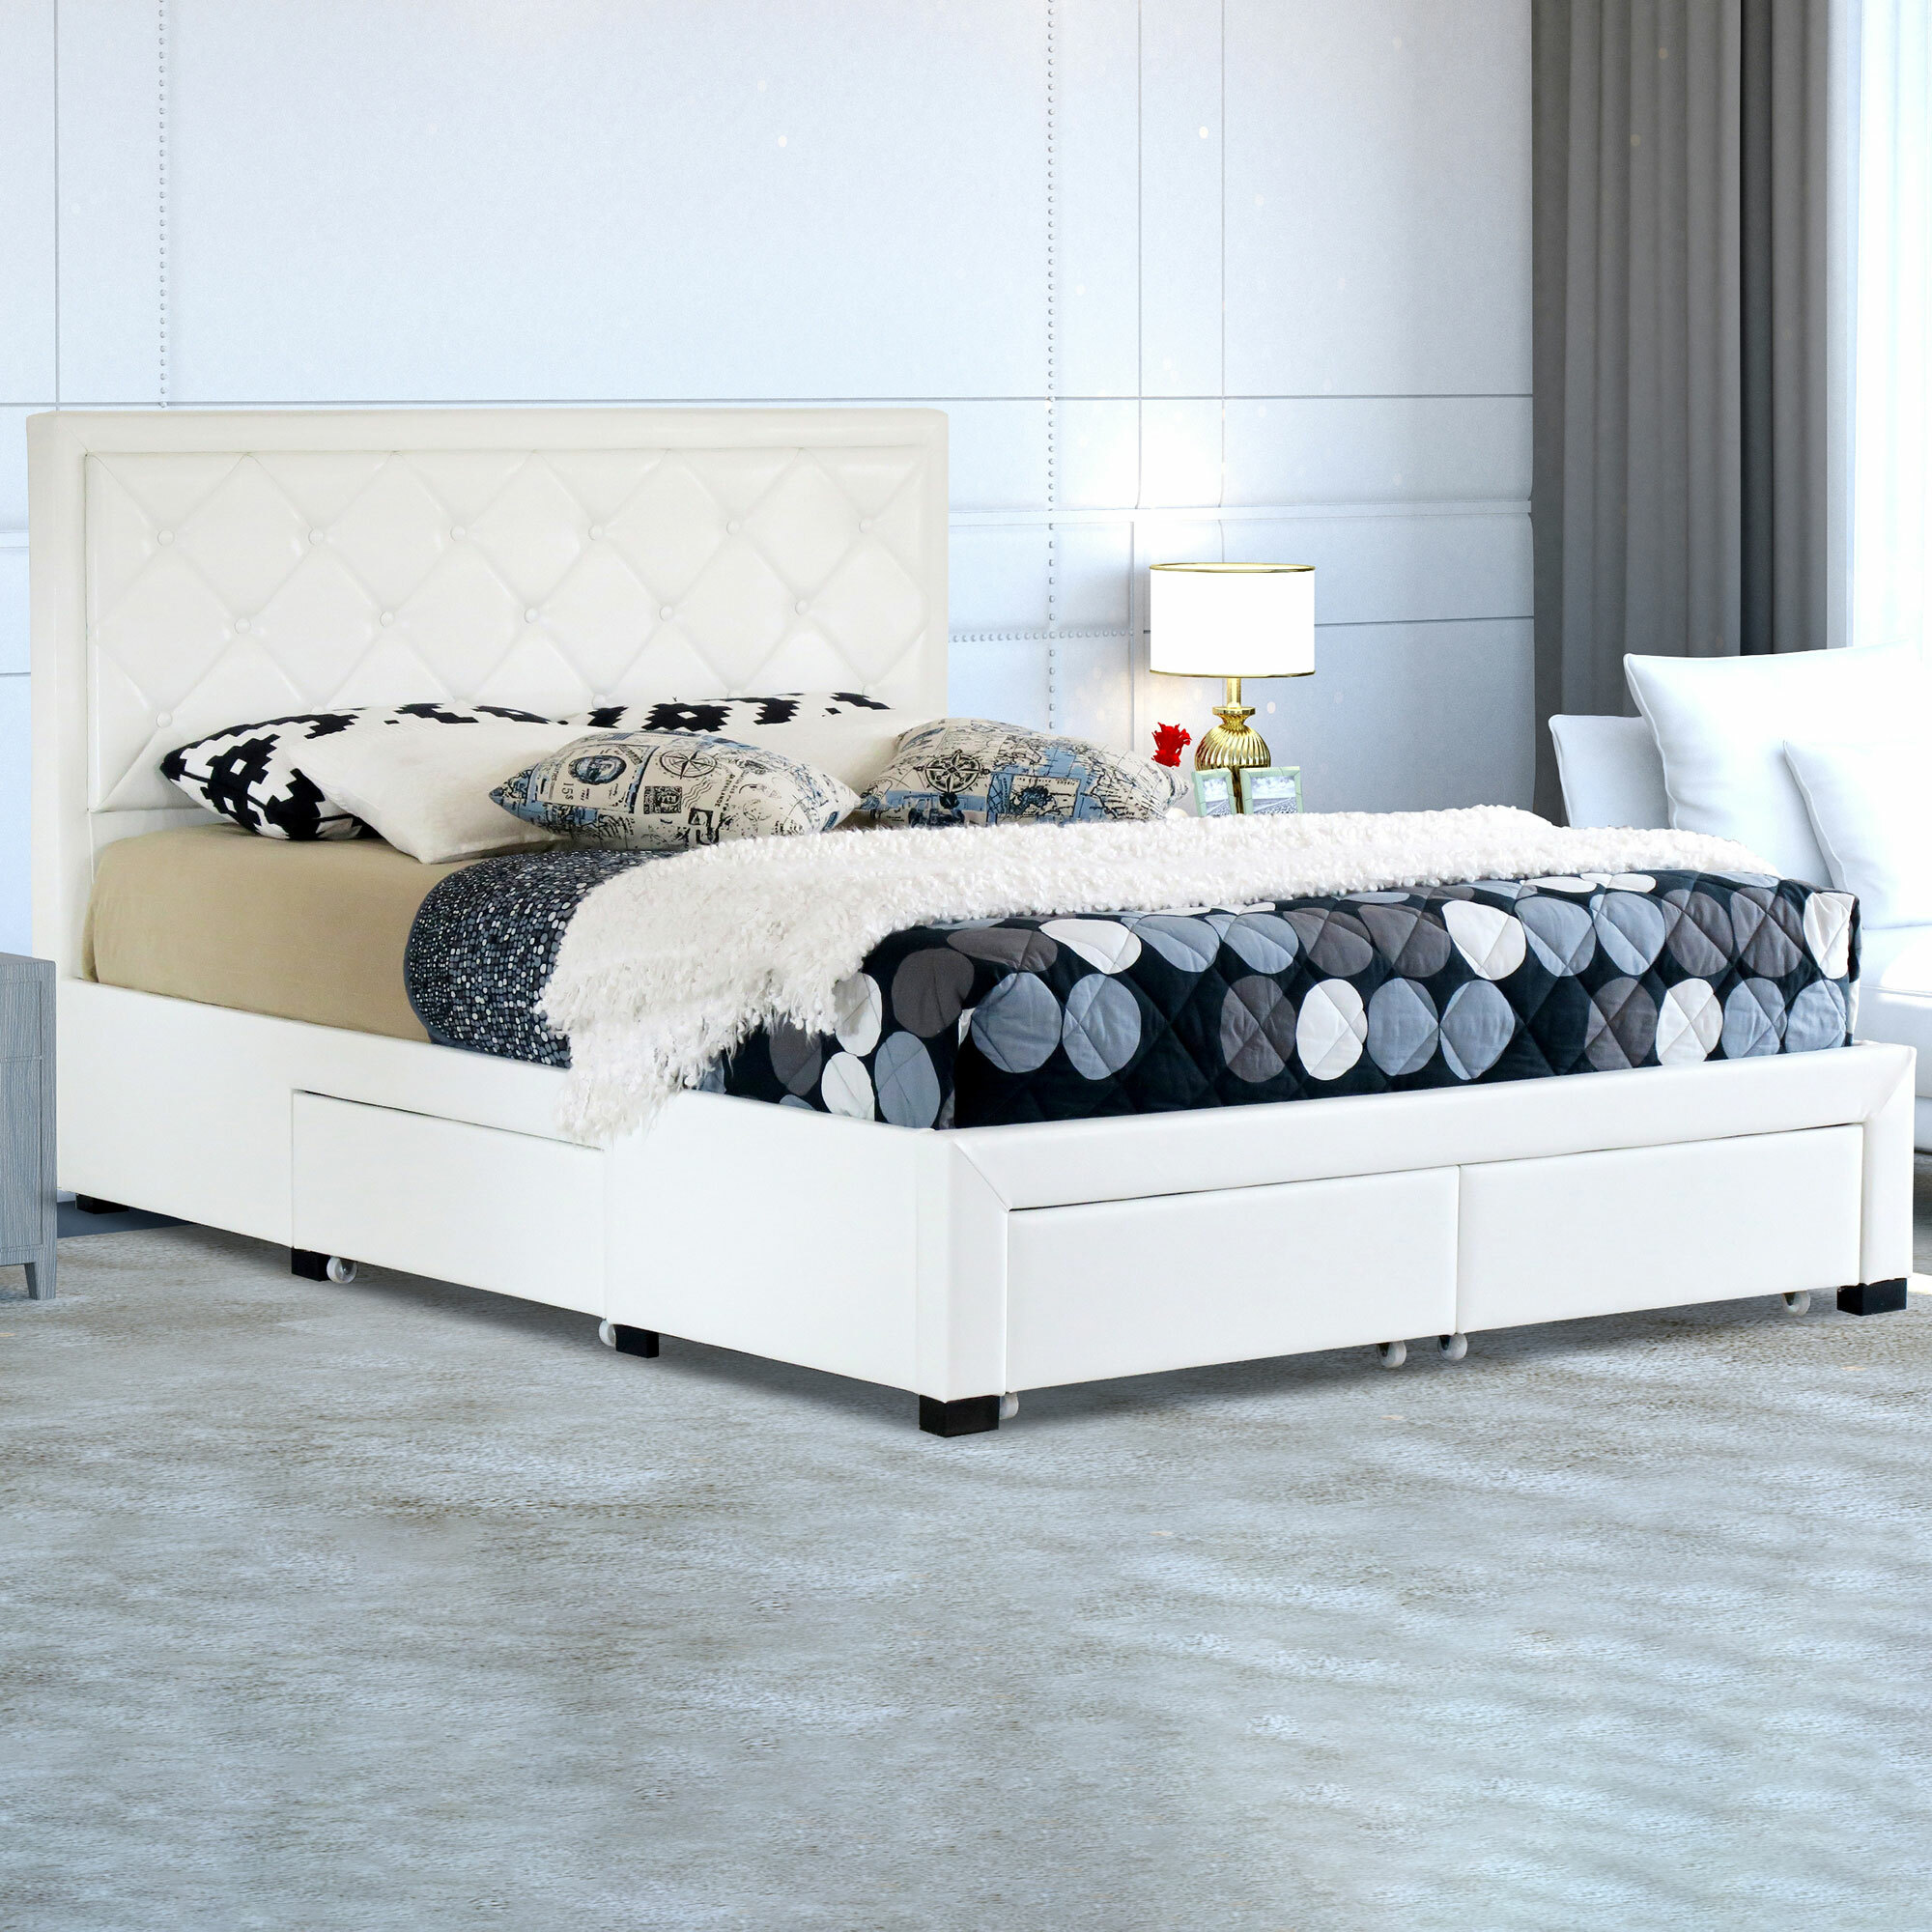 Faux Leather Bed Frame With Storage, White Faux Leather Single Bed Frame